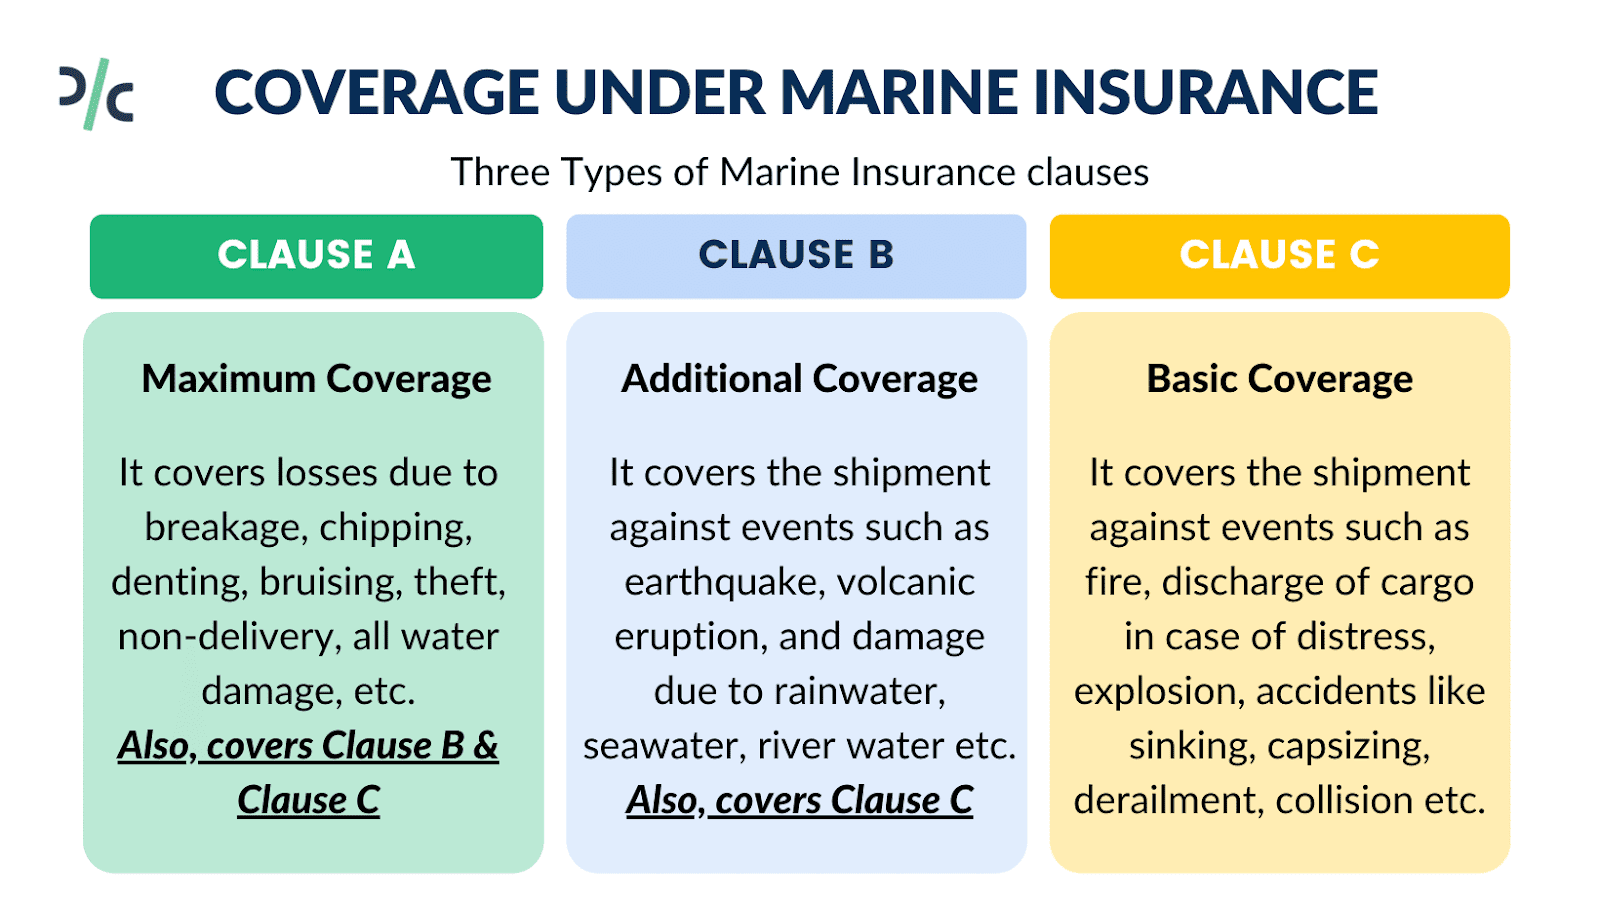 COVERAGE UNDER MARINE INSURANCE What and which clauses cover Marine Insurance